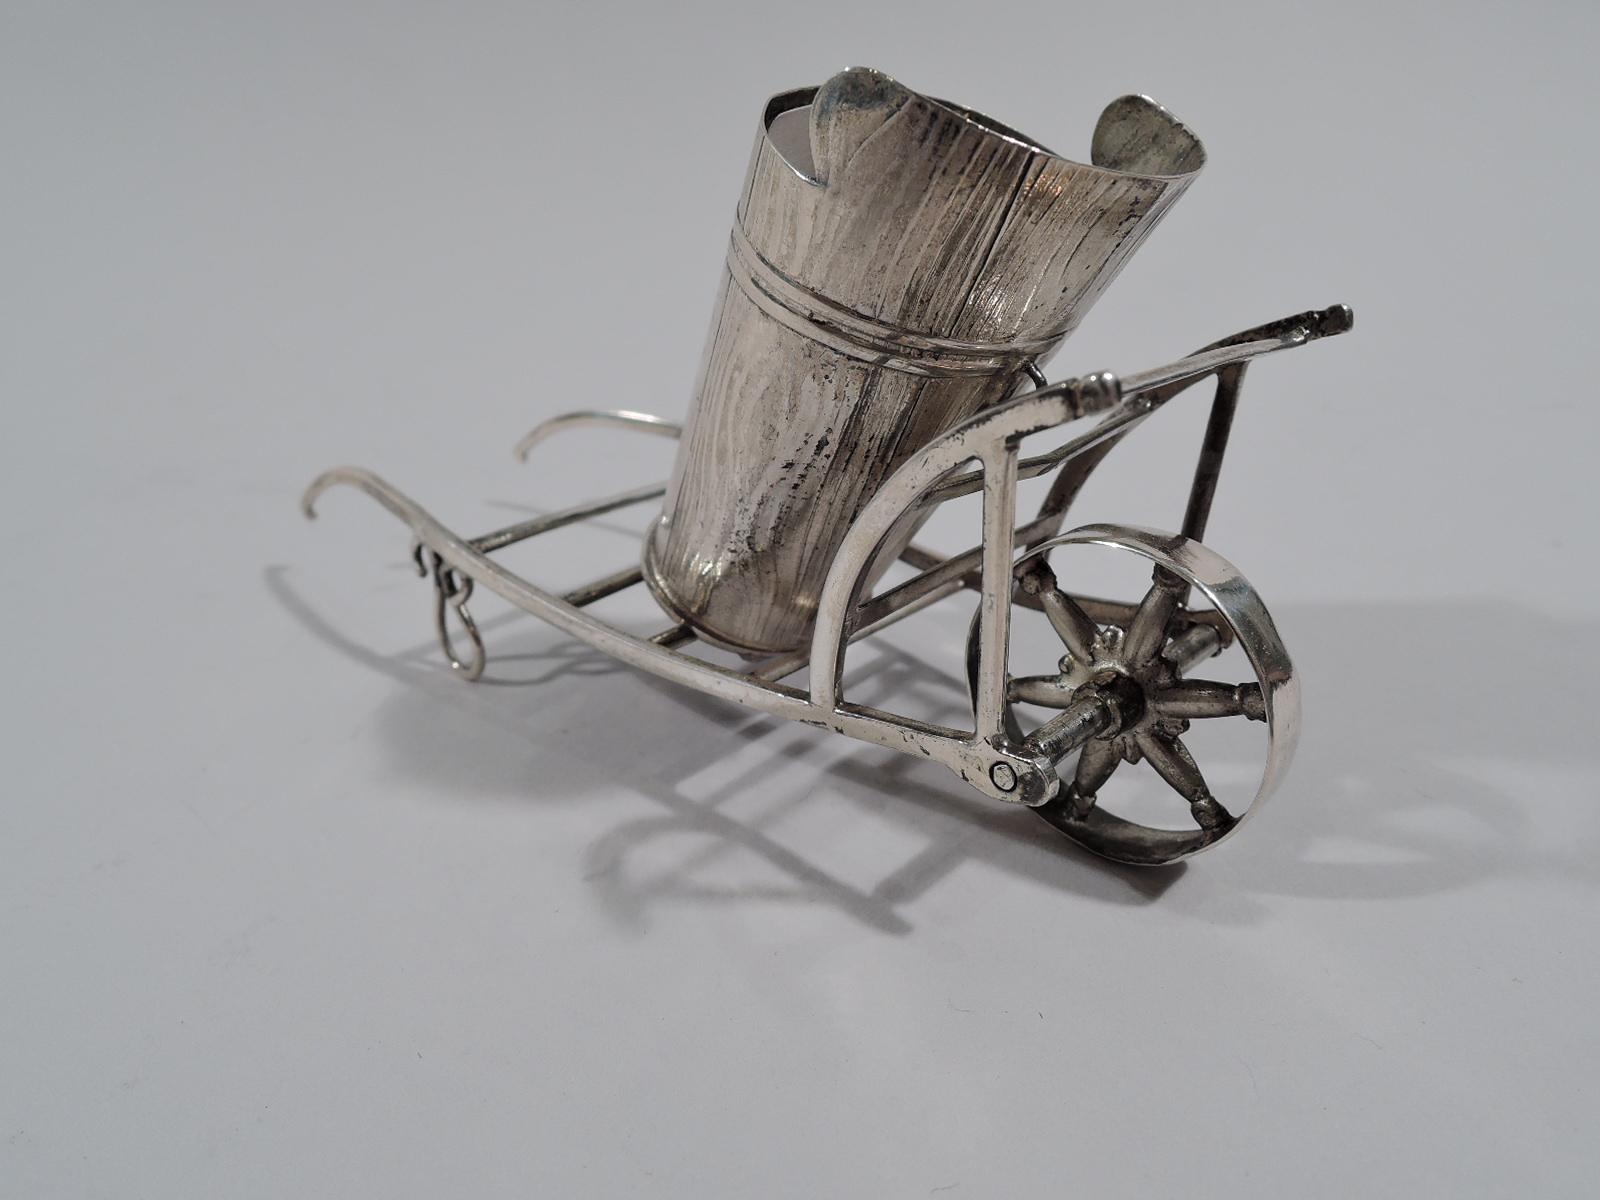 Austrian silver figural match holder, 1860. A pushcart with oval basket mounted to open frame. Spoked wheel rotates. Mark includes year. Weight: 1 troy ounce.